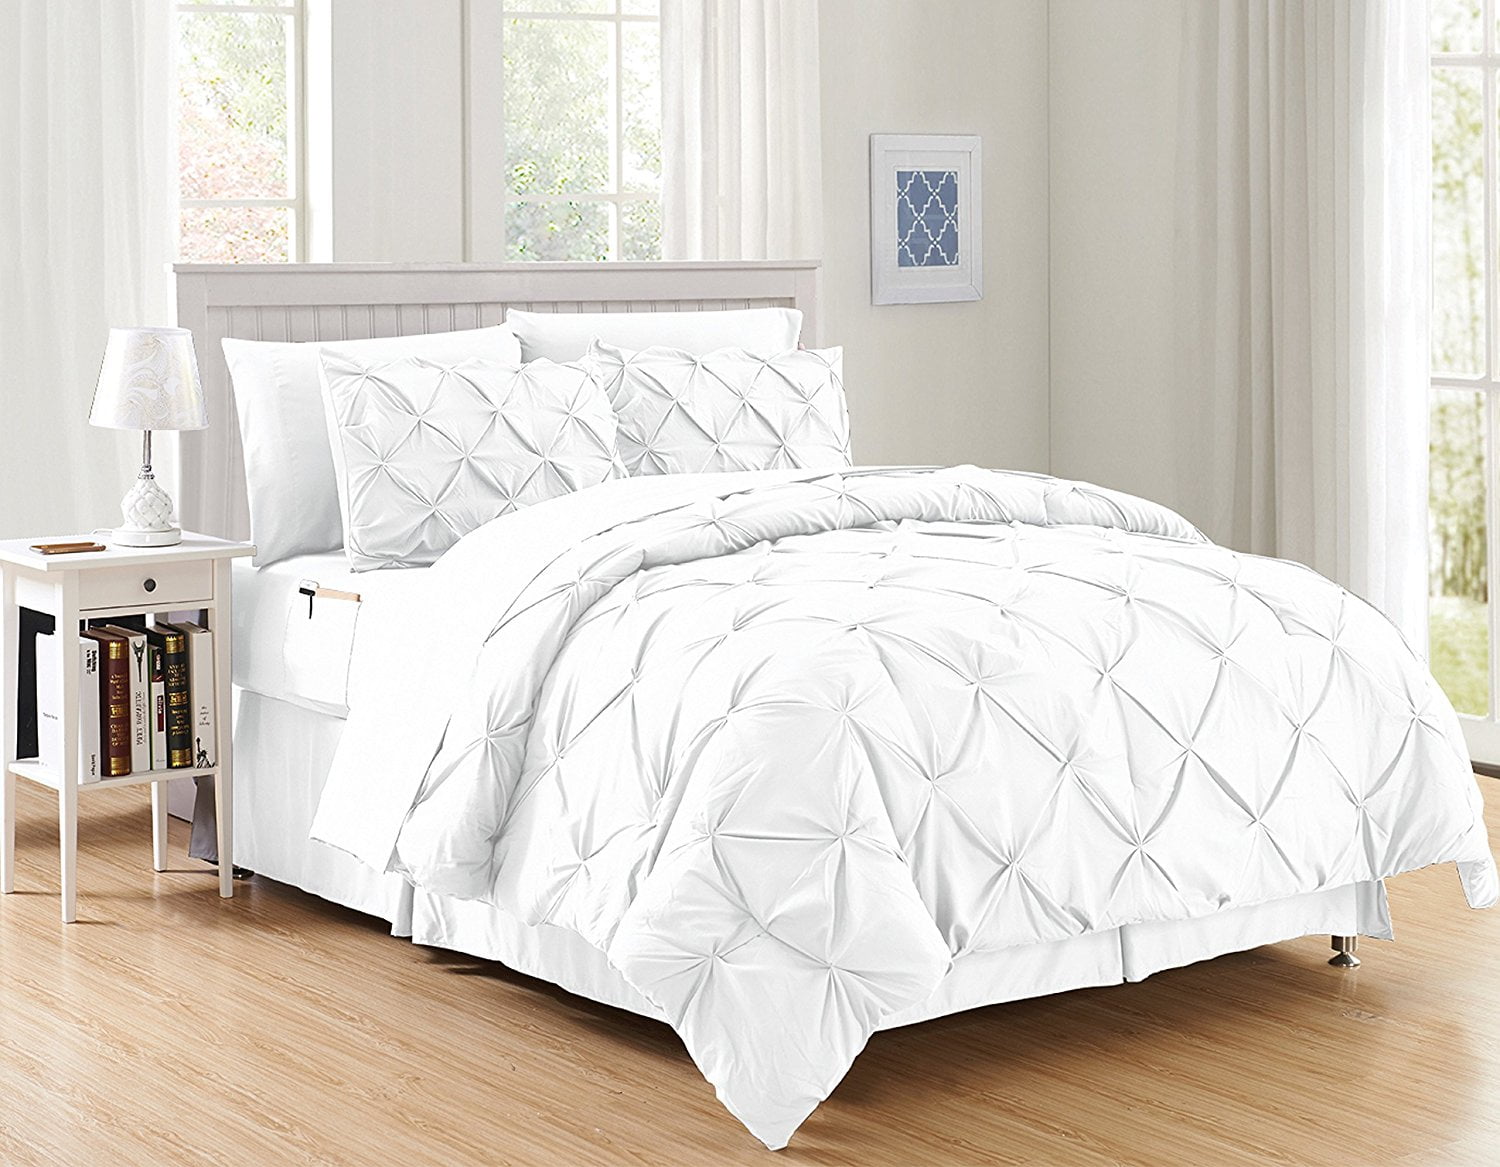 $8.39 Sheets QUEEN Size 6-Piece Set on   Over 100,000 Five-Star  Reviews - Couponing with Rachel